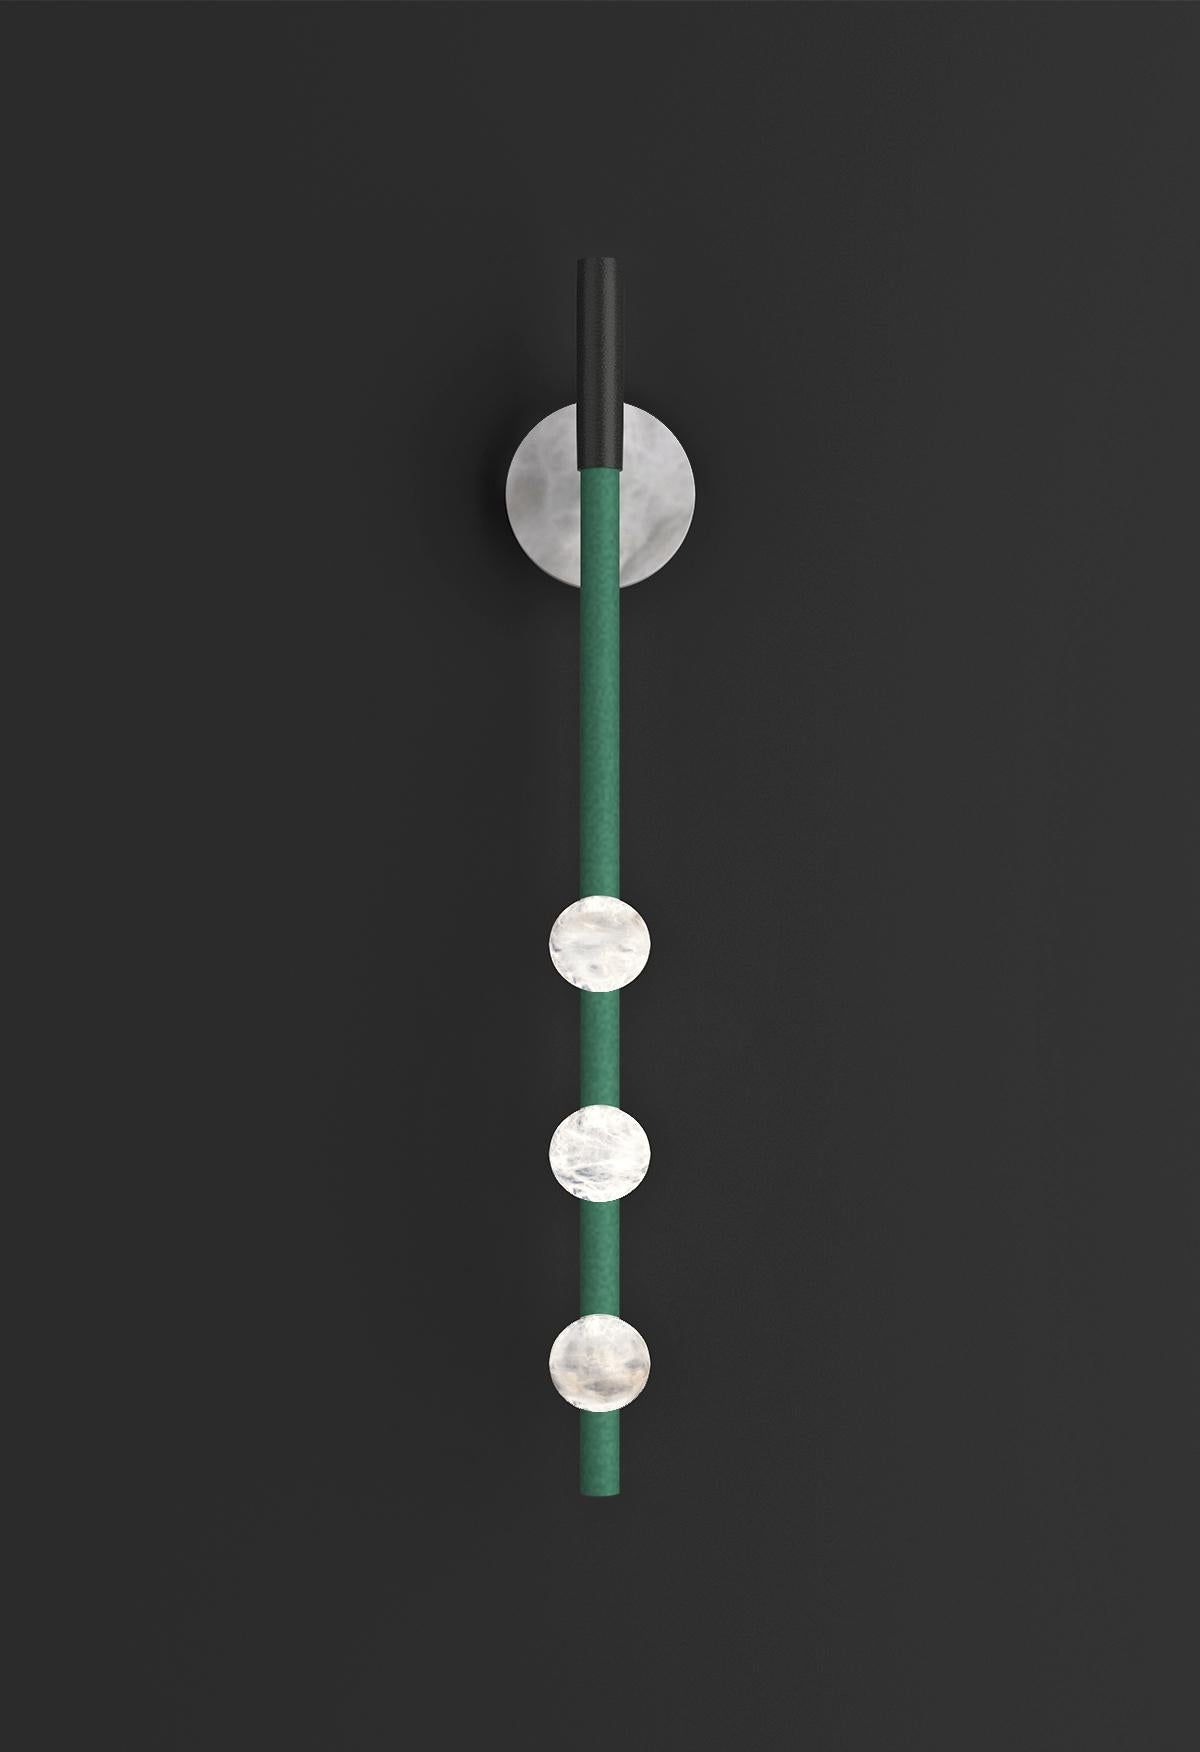 Demetra Freedom Green Metal Wall Lamp by Alabastro Italiano
Dimensions: D 9 x W 10 x H 60 cm.
Materials: White alabaster, metal and leather.

Available in different finishes: Shiny Silver, Bronze, Brushed Brass, Ruggine of Florence, Brushed